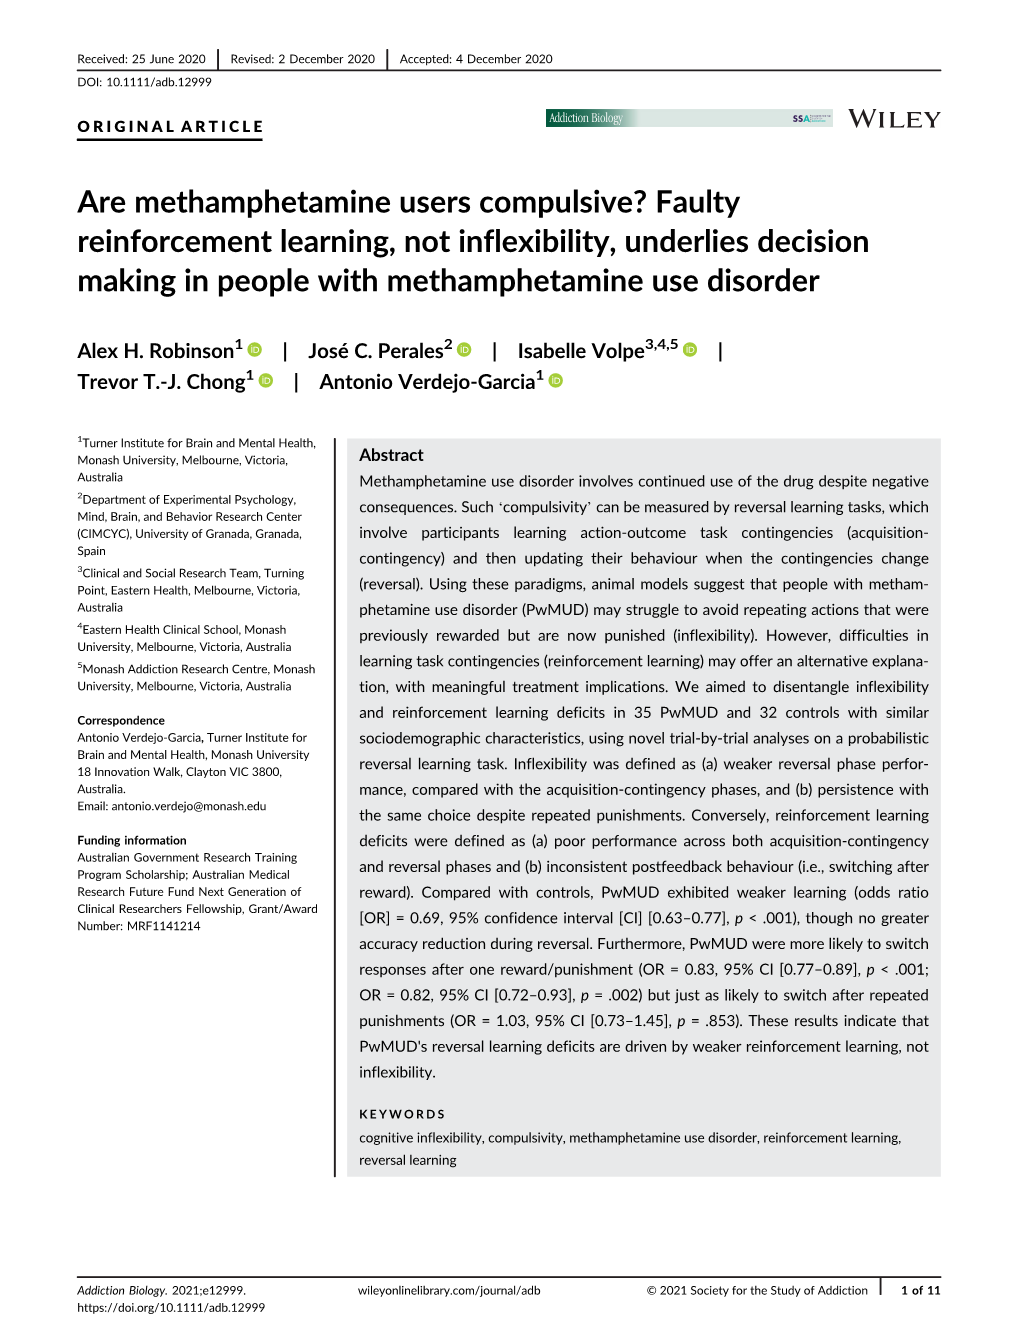 Are Methamphetamine Users Compulsive? Faulty Reinforcement Learning, Not Inflexibility, Underlies Decision Making in People with Methamphetamine Use Disorder